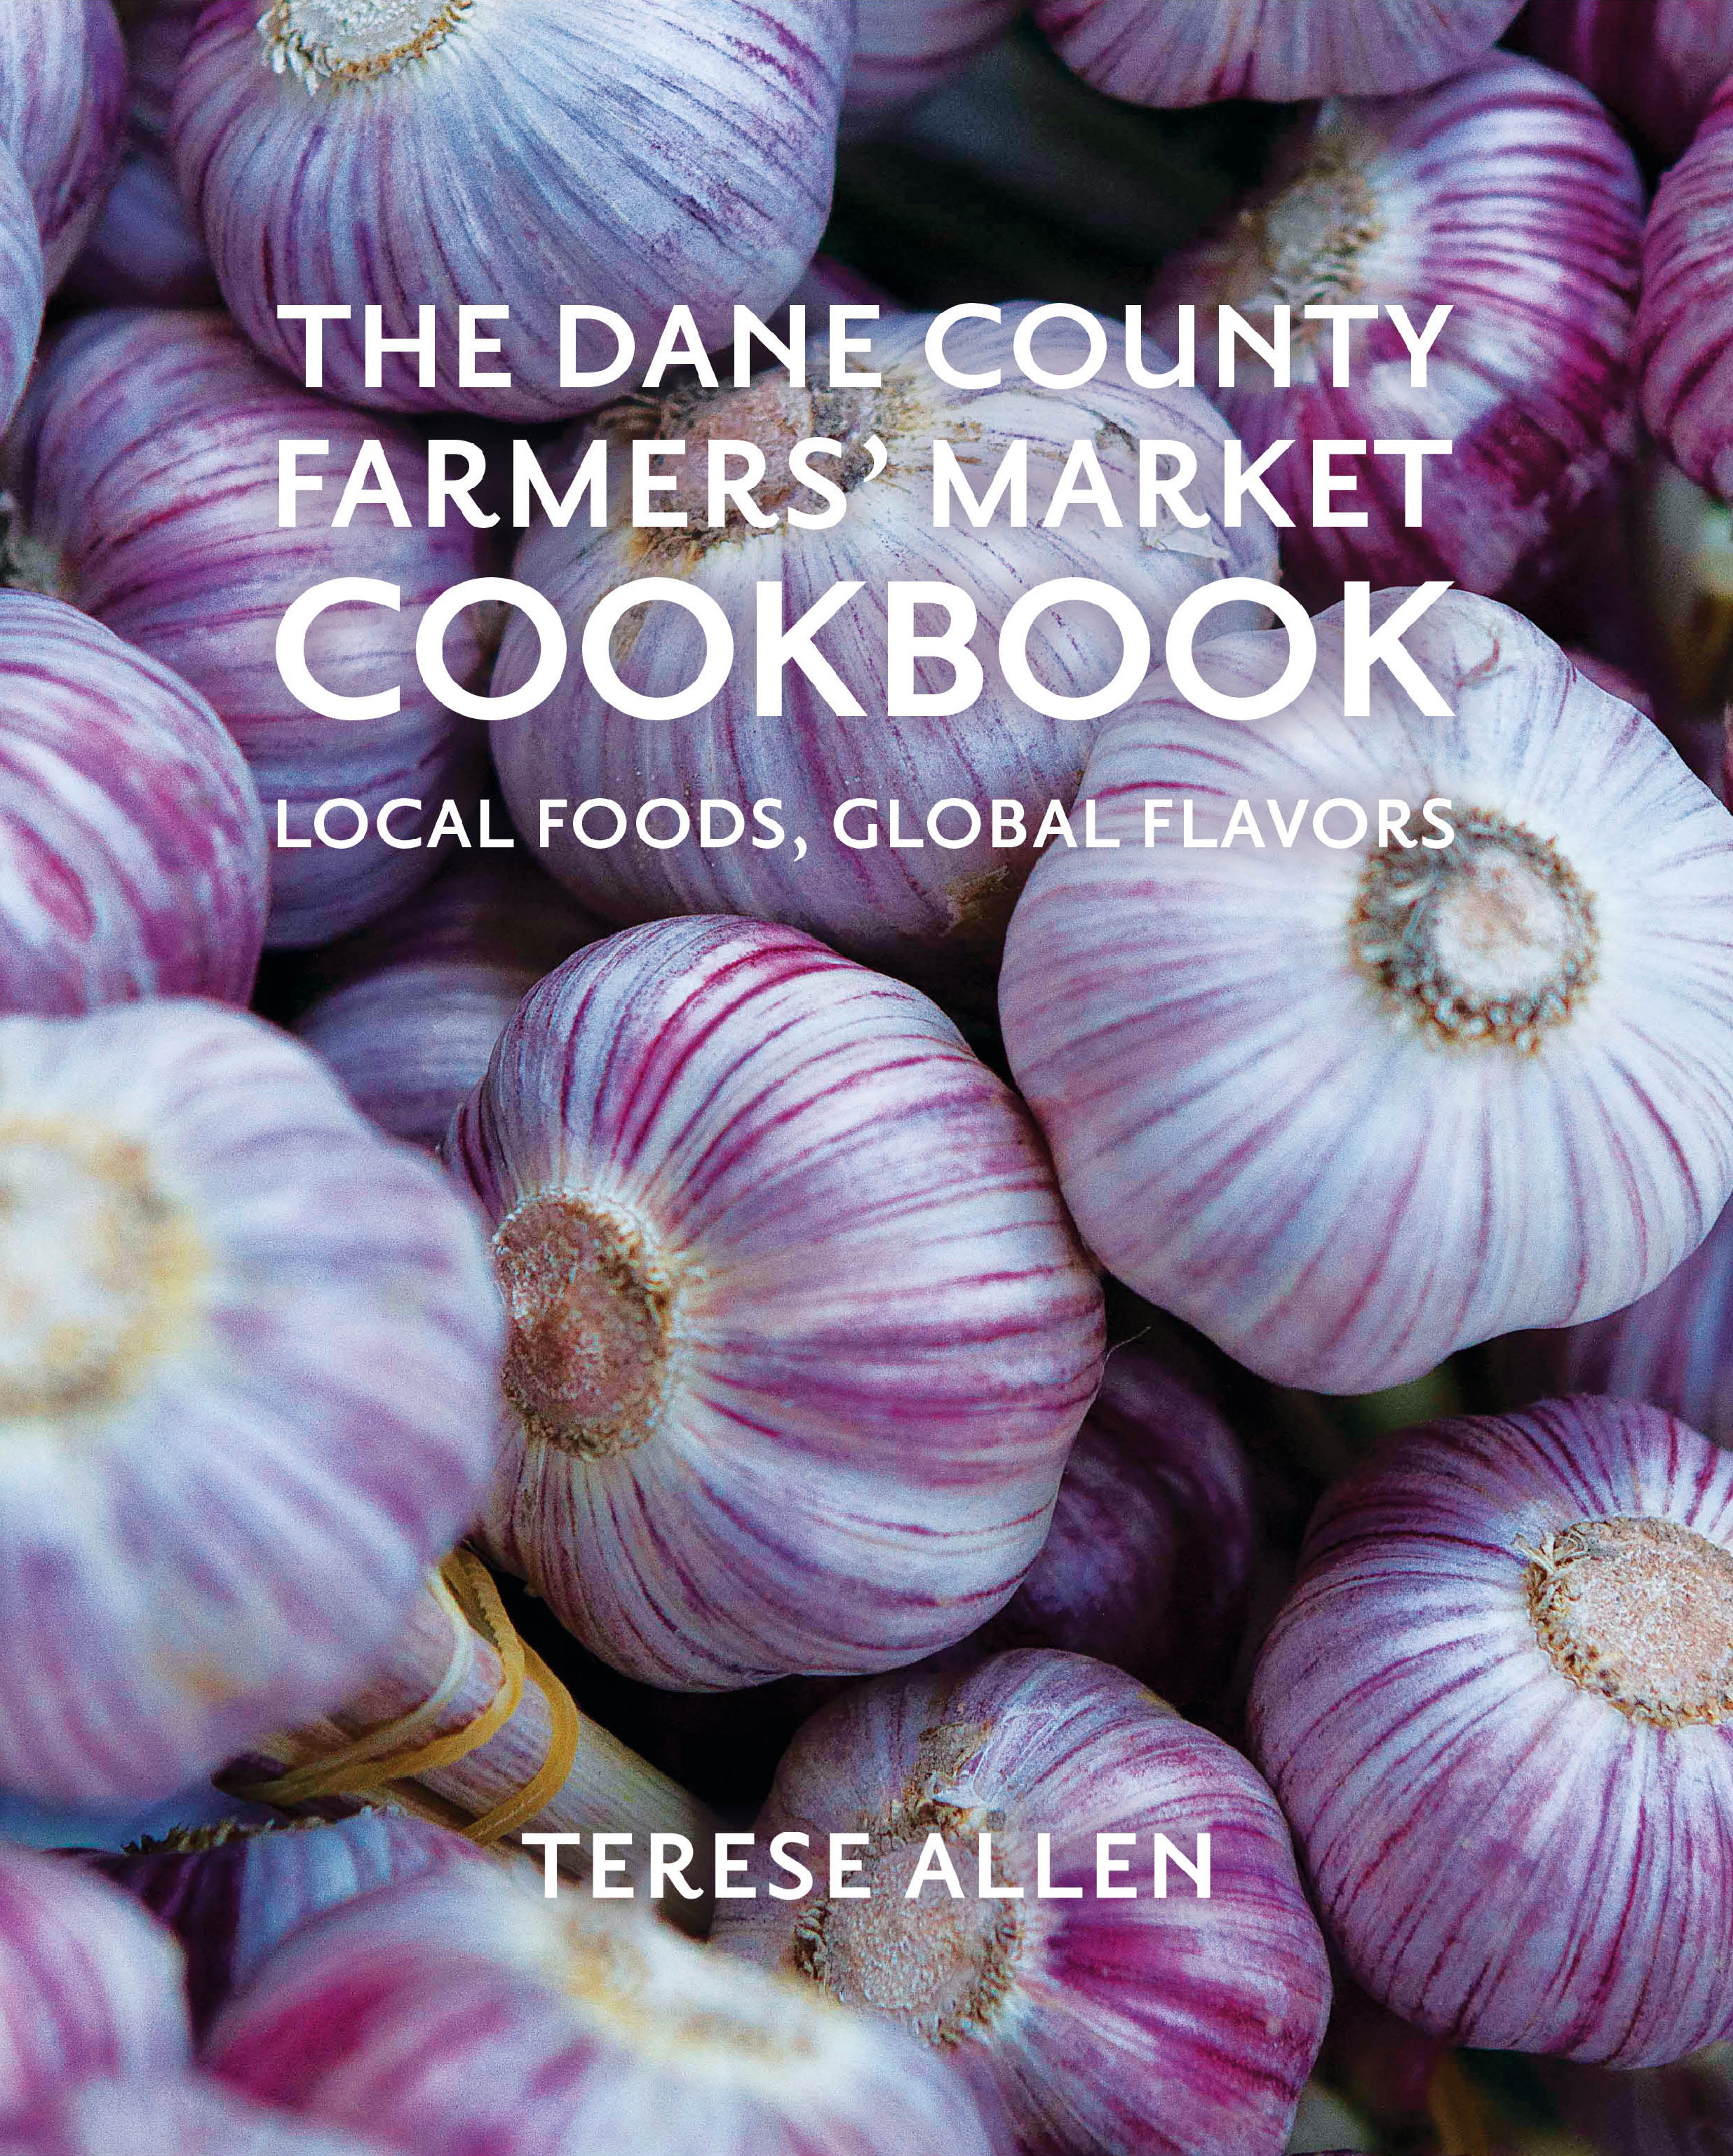 Book cover. The Dane County Farmer's Market Cookbook: Local Foods, Global Flavors. Terese Allen. Photo of beautiful heads of garlic with purple striped skin in background.